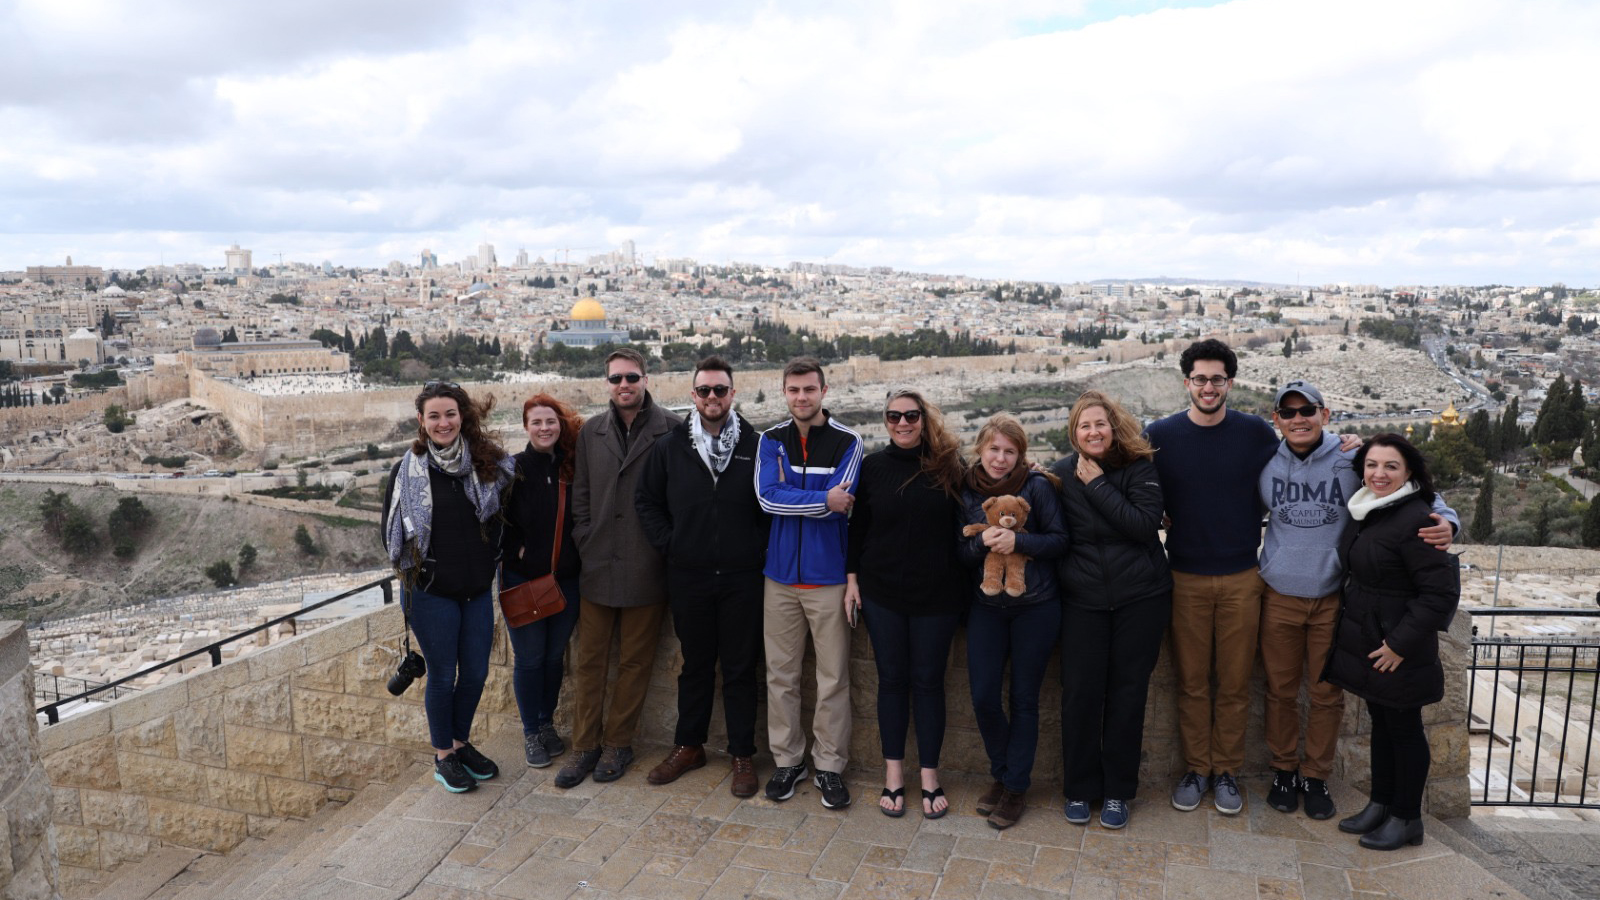 Fakhira Halloun stands with her students for a group photo in Jerusalem.